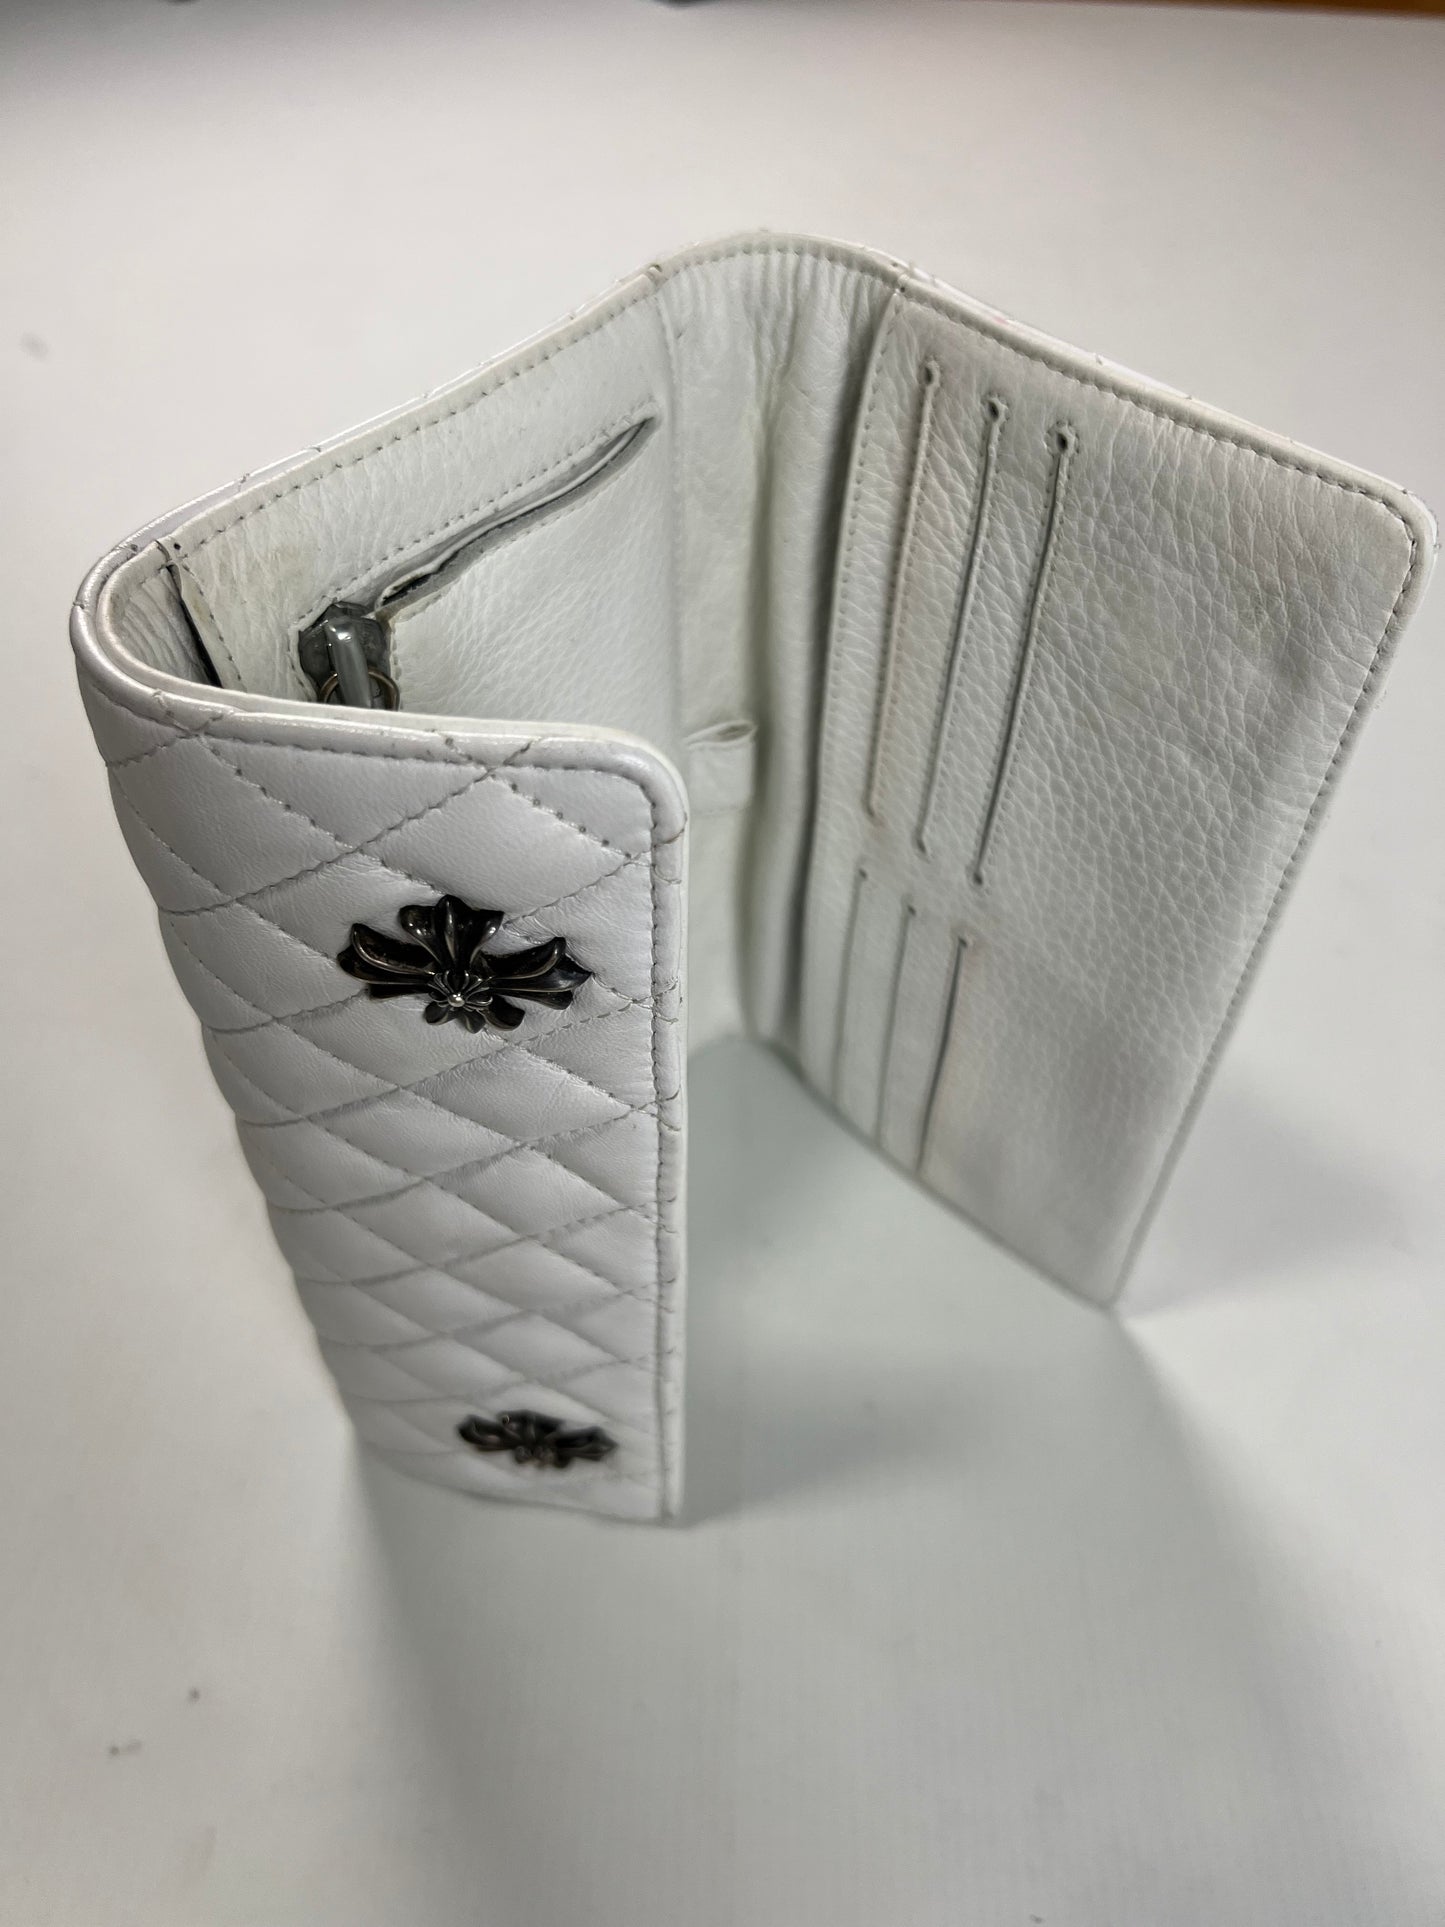 Chrome Hearts quilted white Wallet with silver crosses SZ:OS